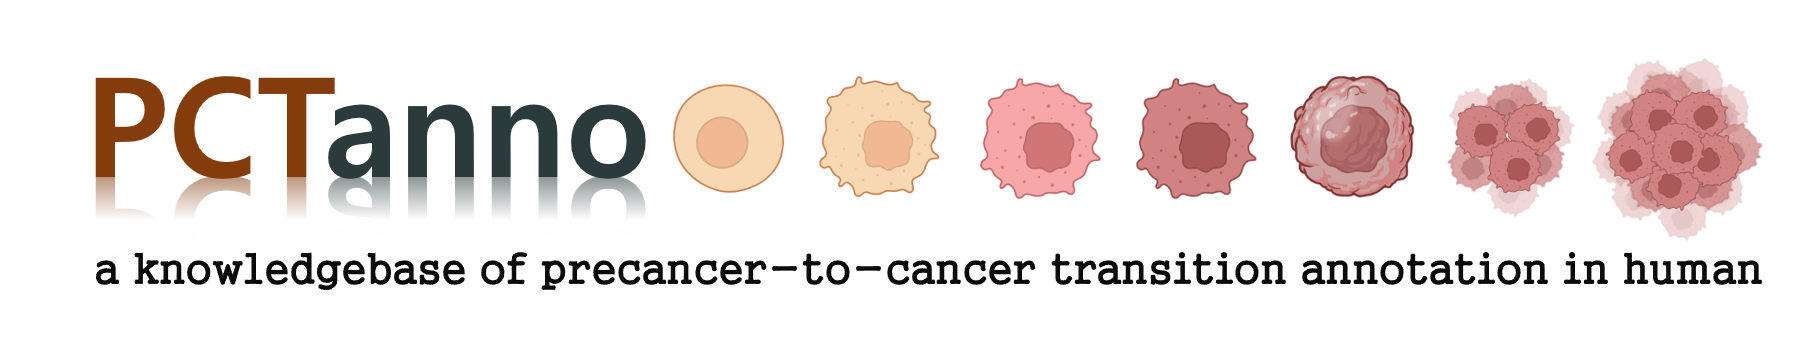 Schematic overview of the cellular and molecular mechanisms involved in the cancer progression, including the proposed cellular and molecular mechanisms in cancer cells trajectory. AT1: alveolar type 1 cells; AT2: alveolar type 2 cells; AAH: atypical adenomatous hyperplasia; AIS: adenocarcinoma in situ; MIA: minimally invasive adenocarcinoma; IA: invasive adenocarcinoma; EMT: epithelial-mesenchymal transition